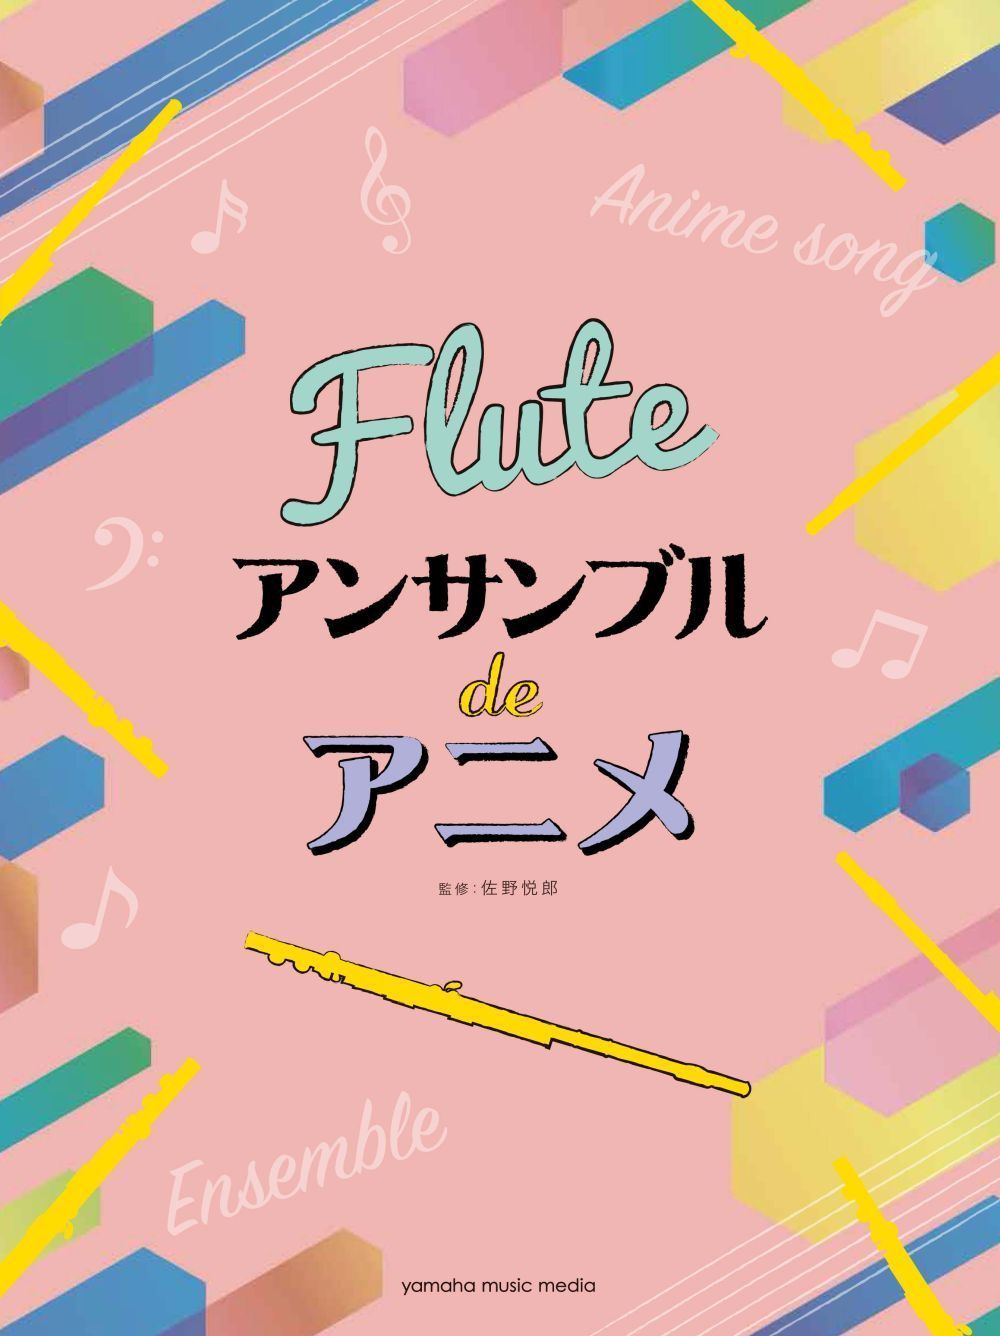 anime songs on flute with notesTikTok Search